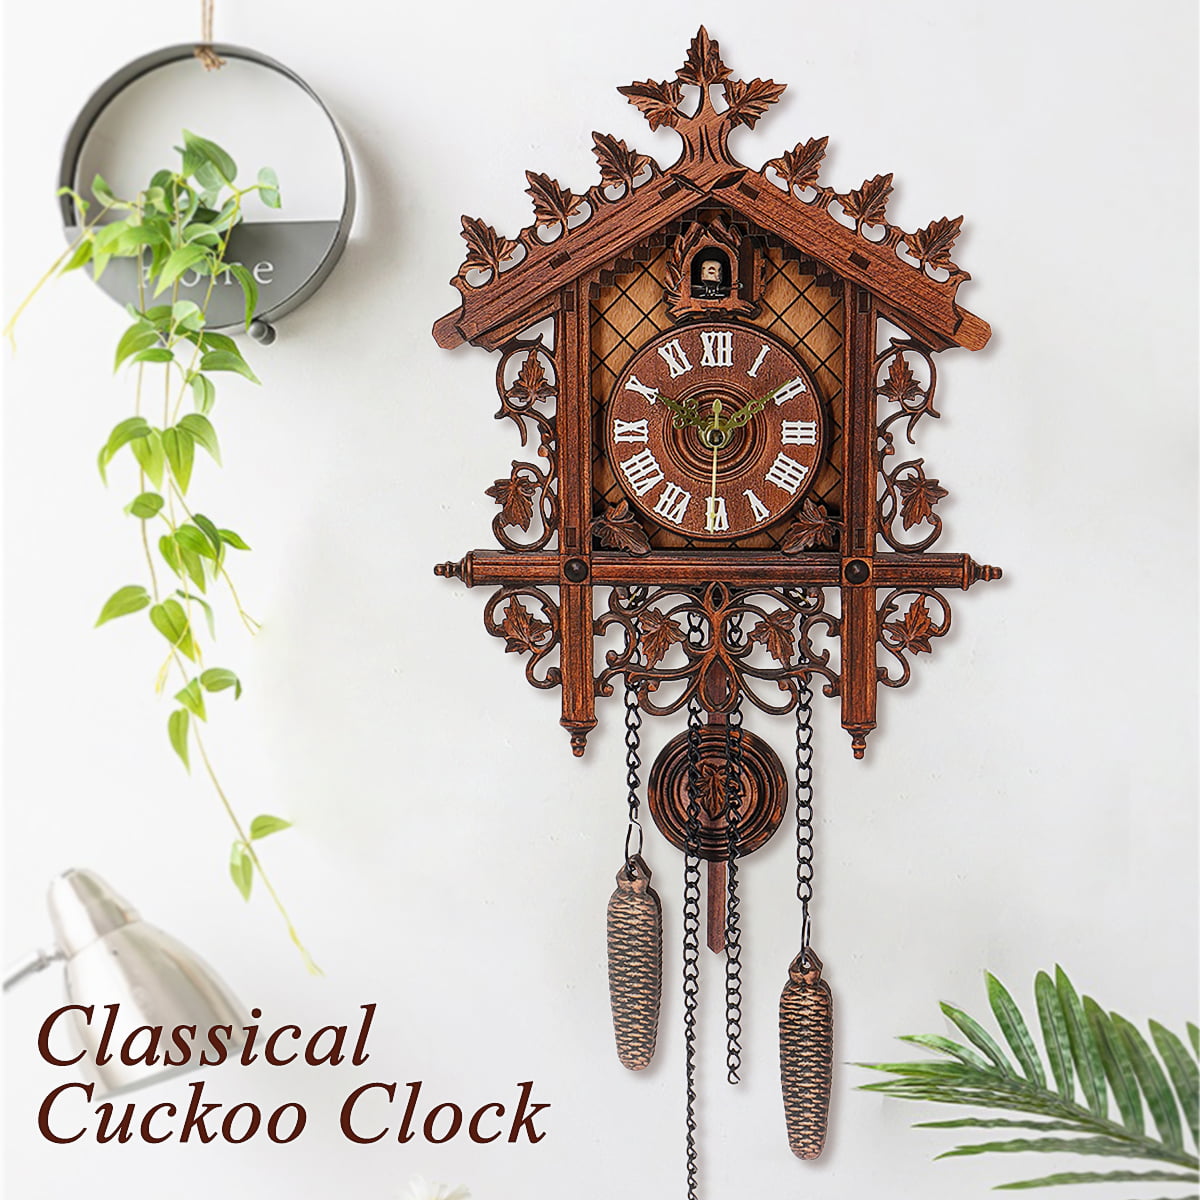 BESPORTBLE Cuckoo Clock Traditional Forest Wood Clock Wall Decor Ornament without Battery 